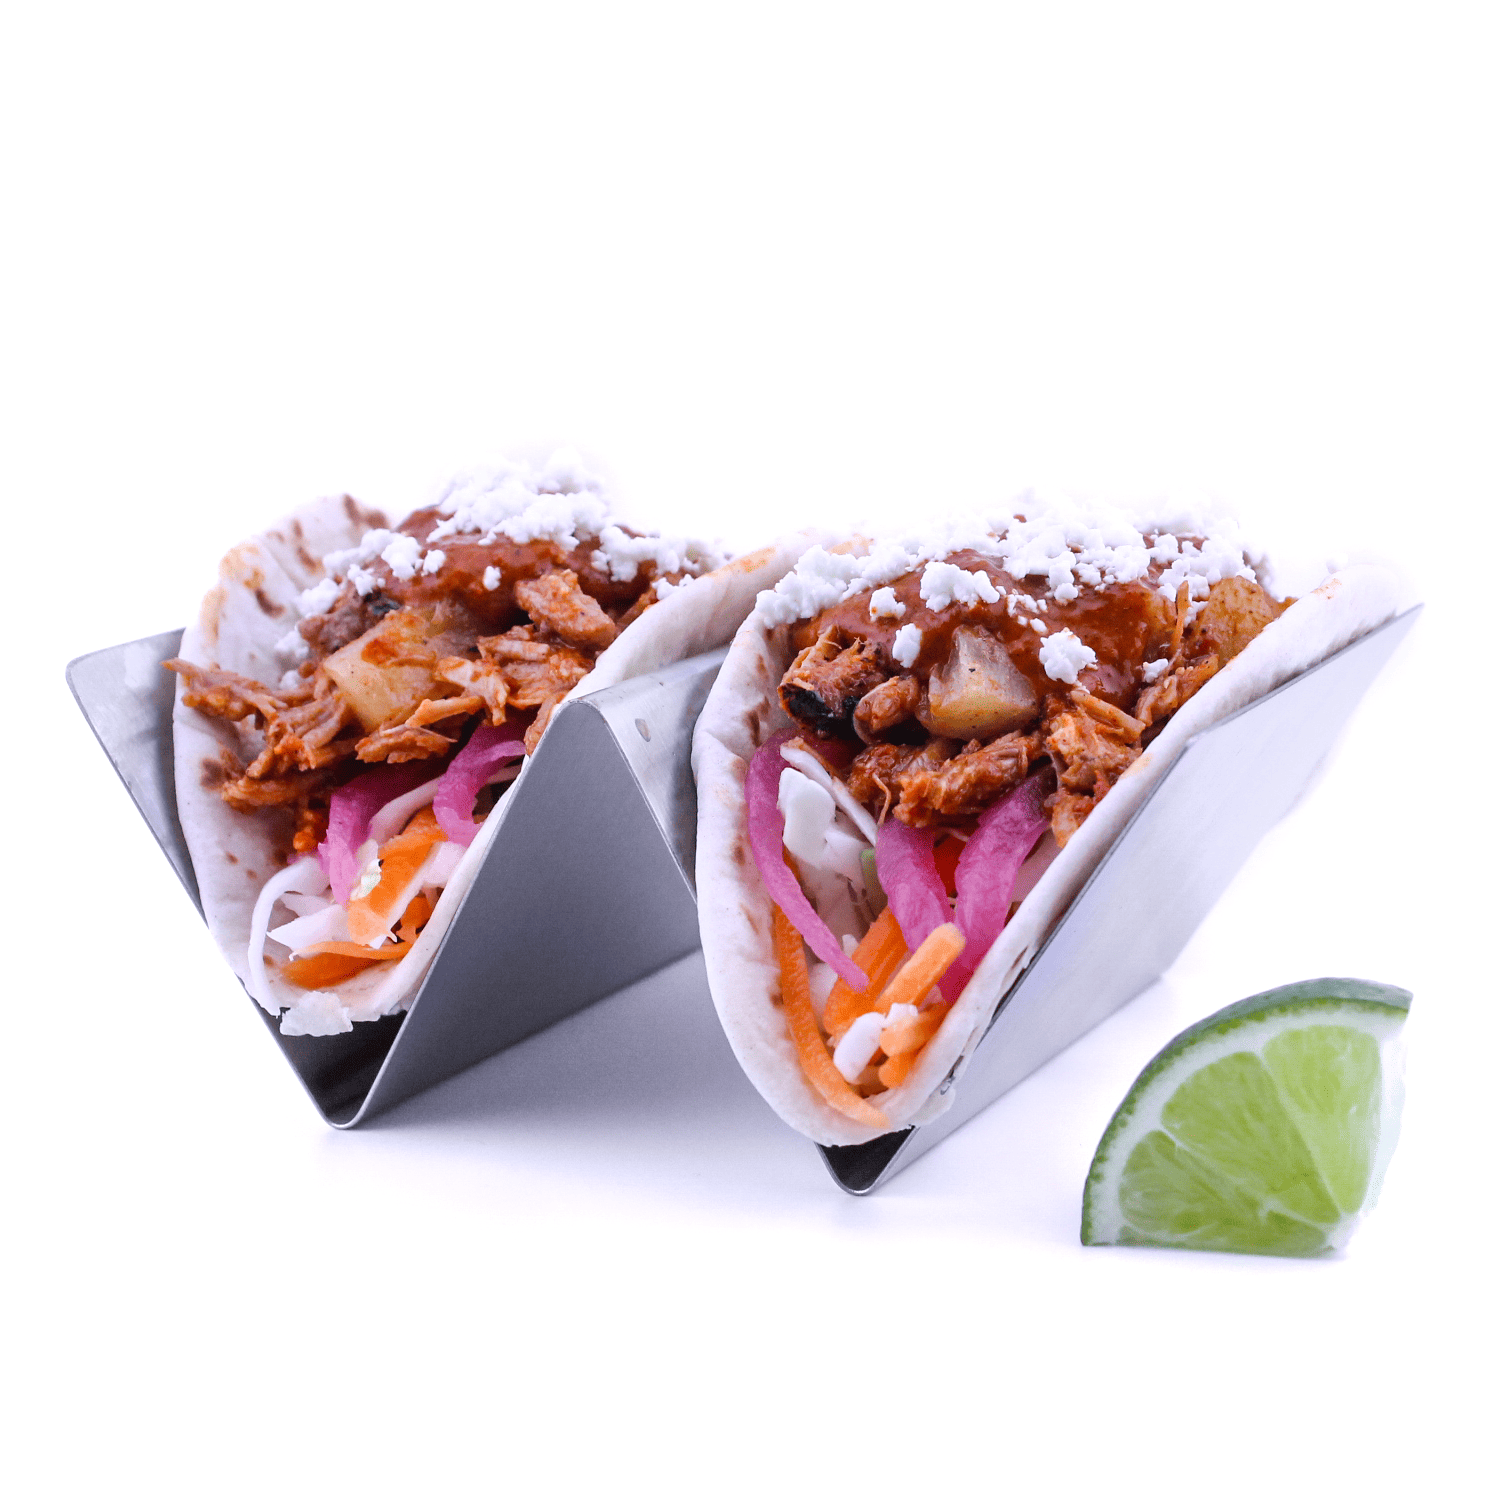 Pork Pastor Tacos - Pork pastor, green cabbage and shredded carrots, pickled red onions, feta cheese, ancho lime vinaigrette on two toasted flour tortillas